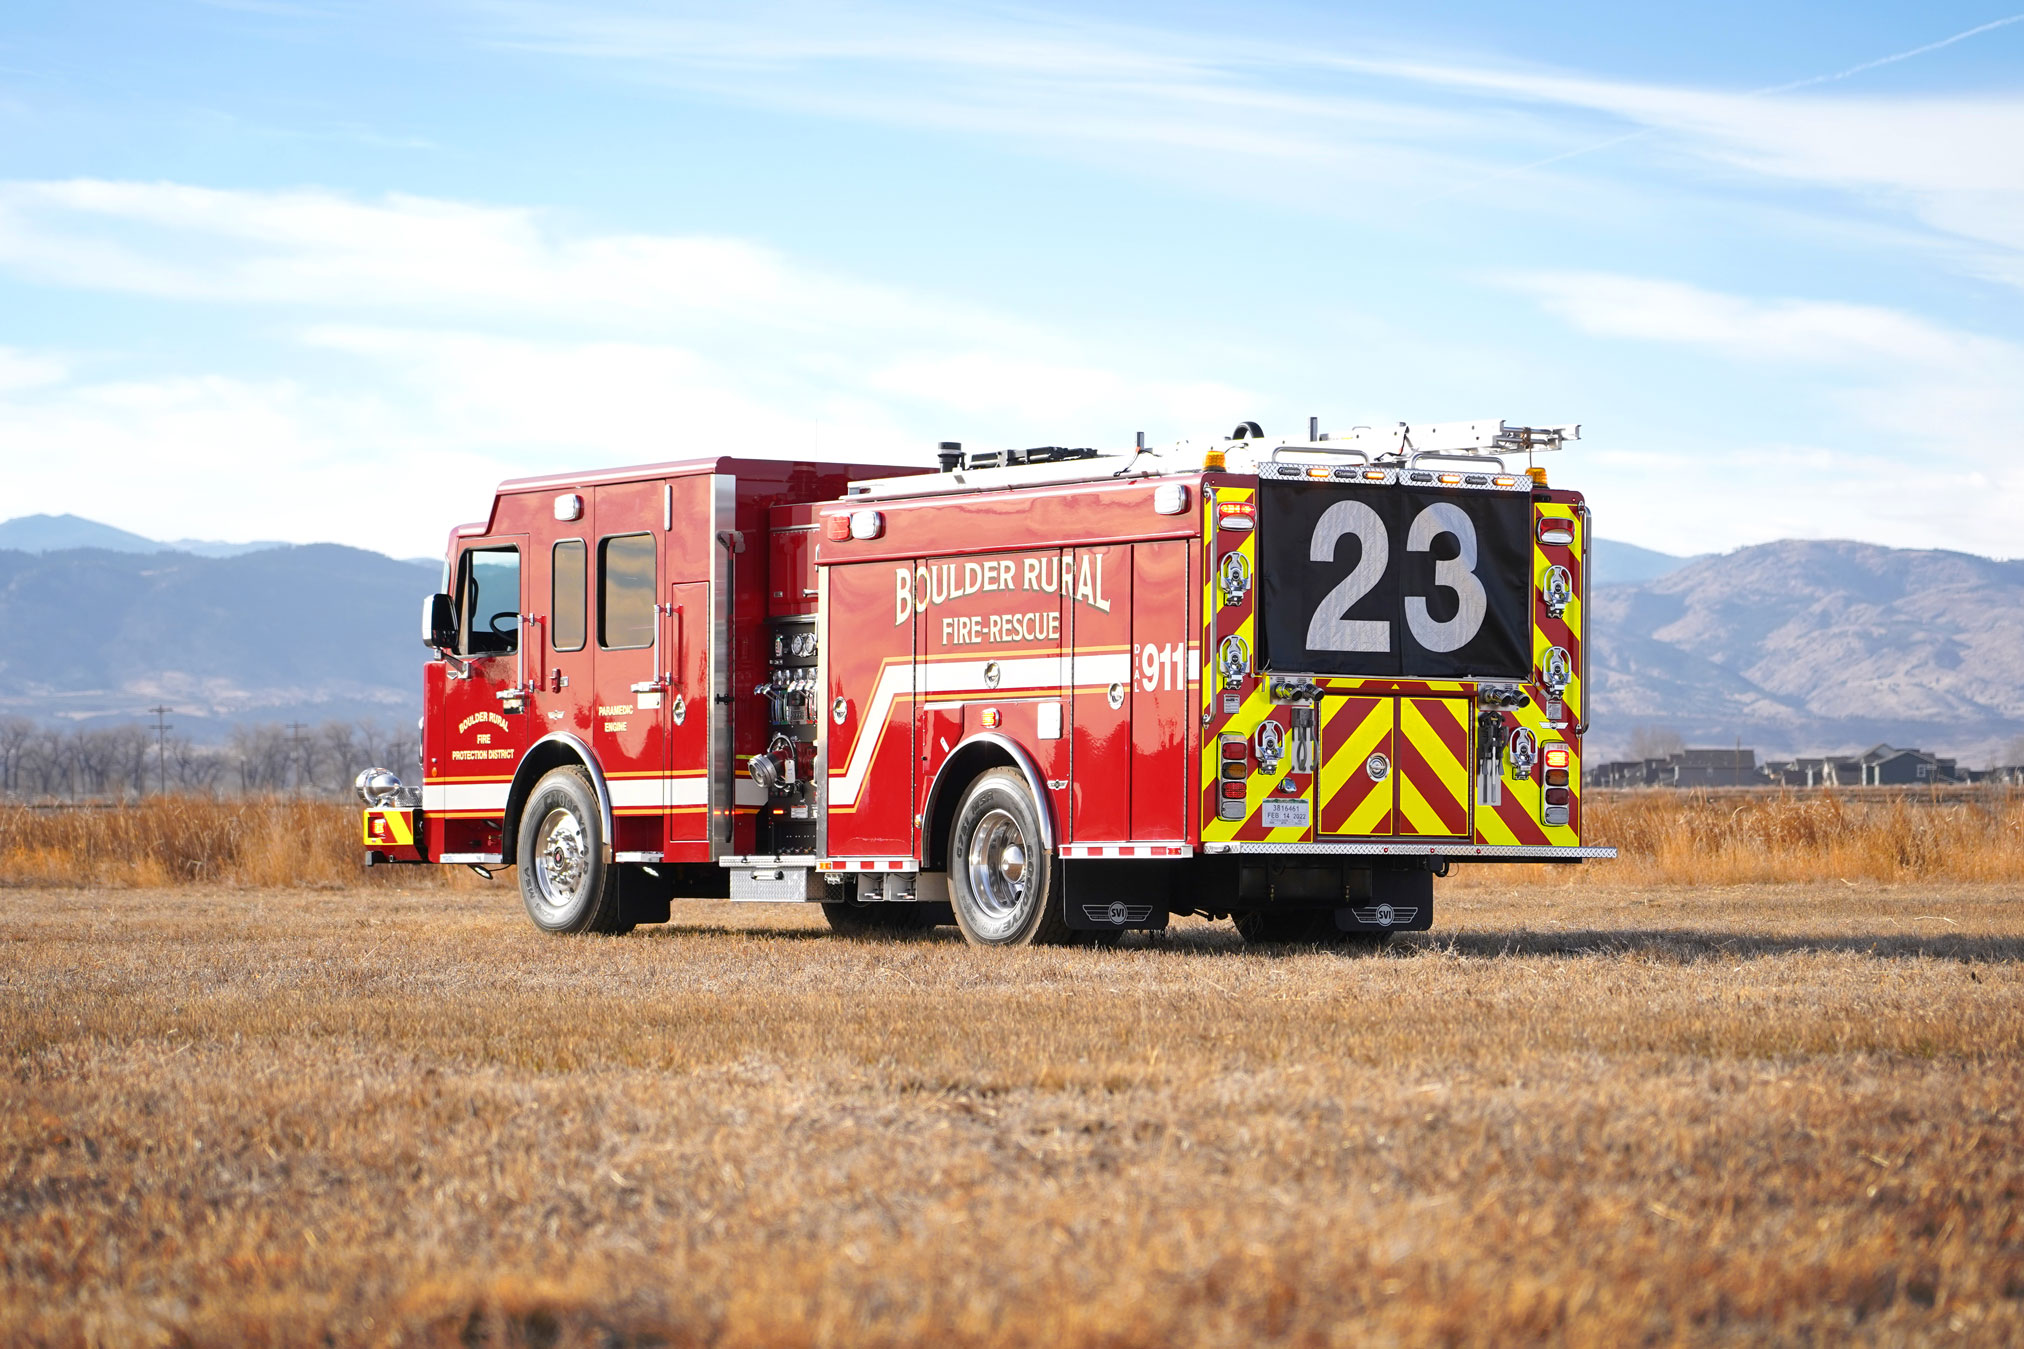 Featured image for “Boulder Rural Fire-Rescue Paramedic Engine”